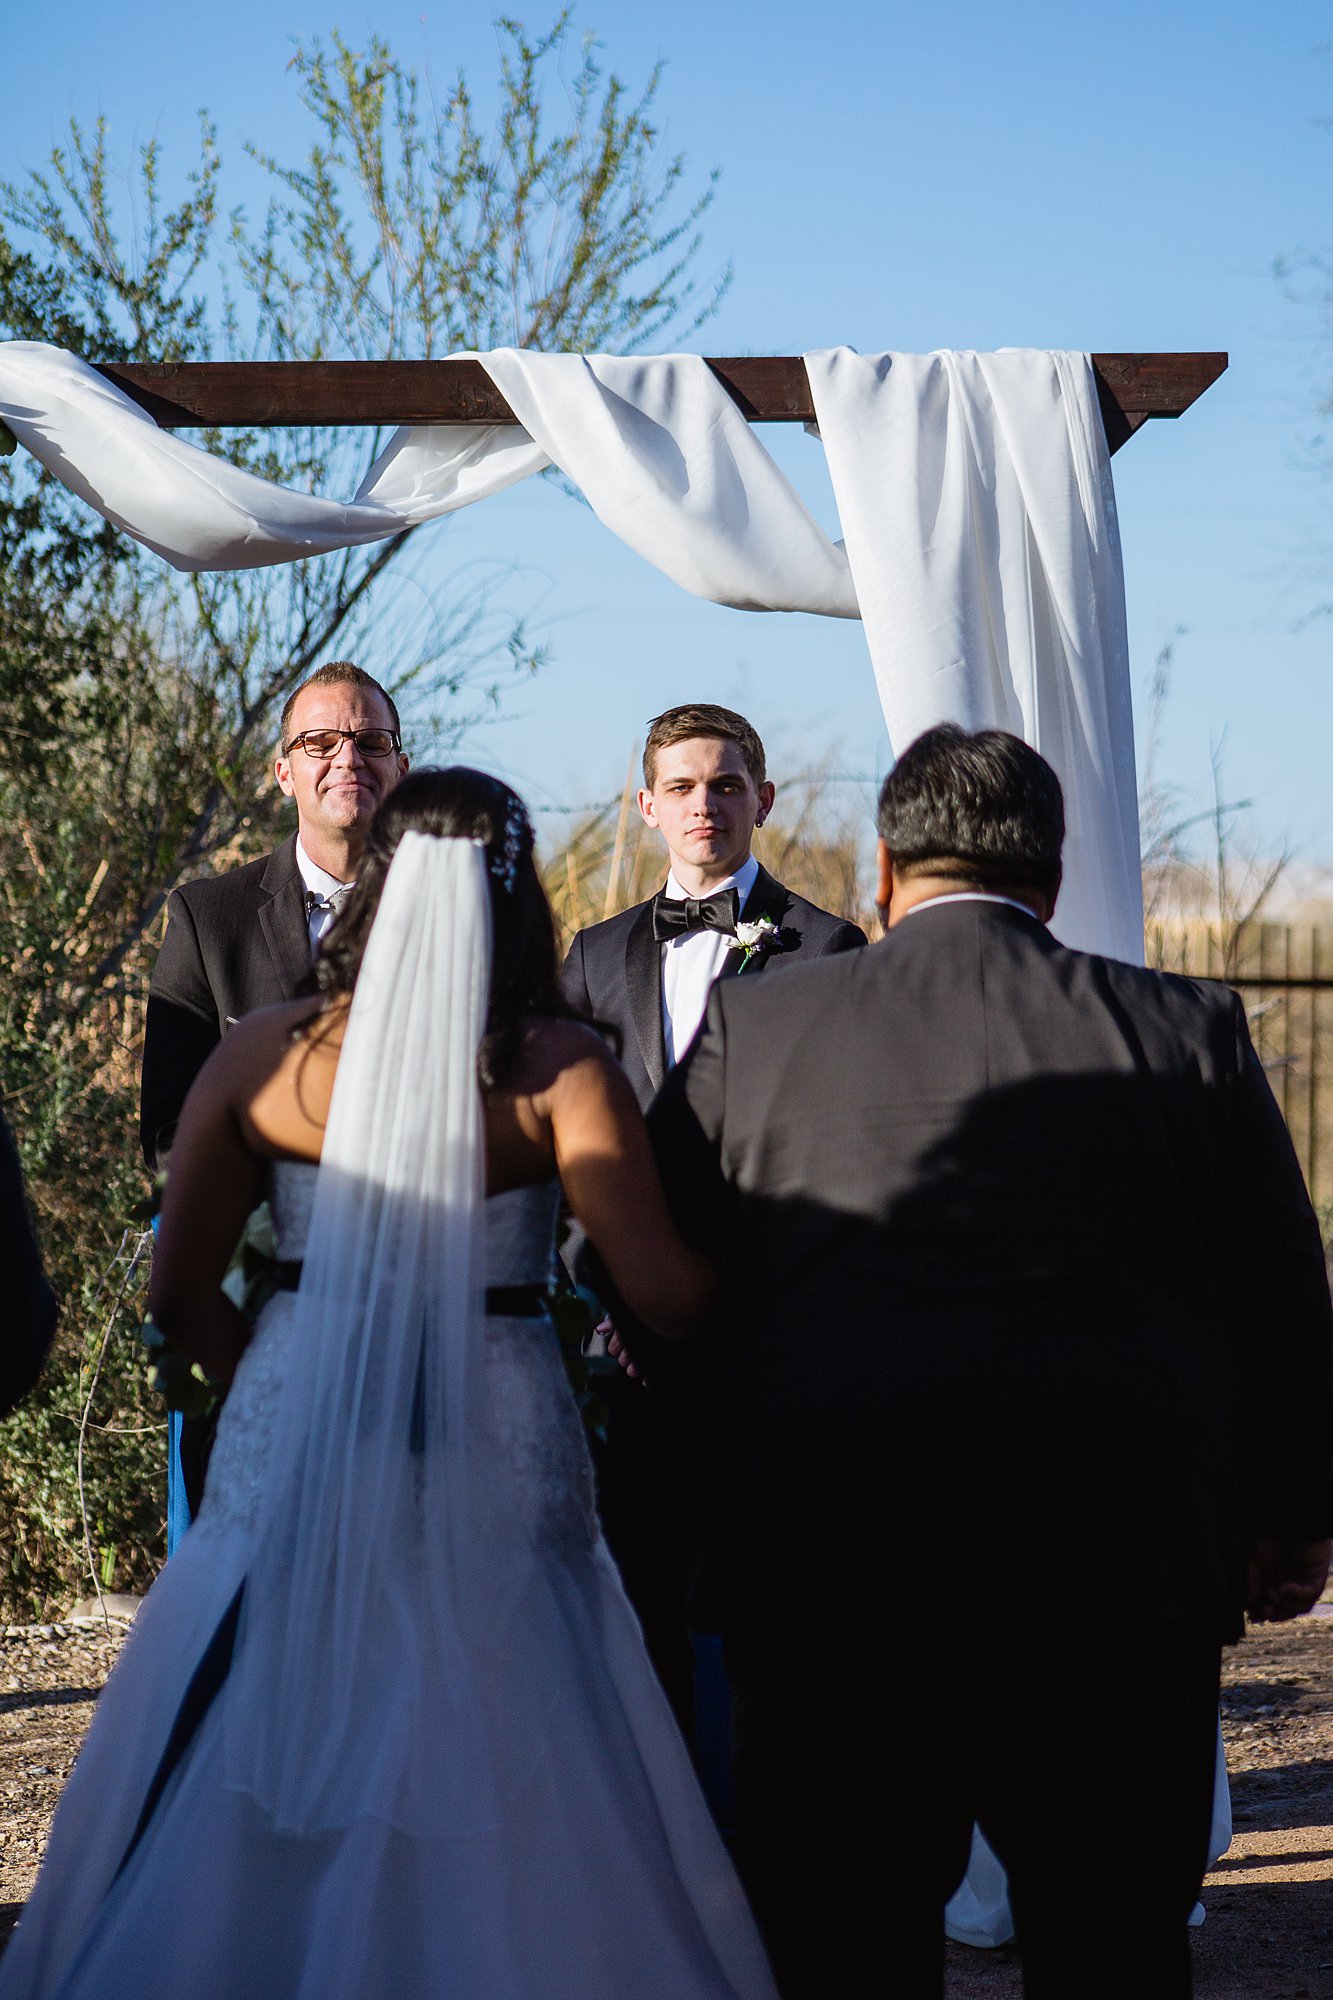 Groom watching bride's father walk her down the aisle during wedding ceremony at the Rio Salado Audubon by Phoenix wedding photographers PMA Photography.